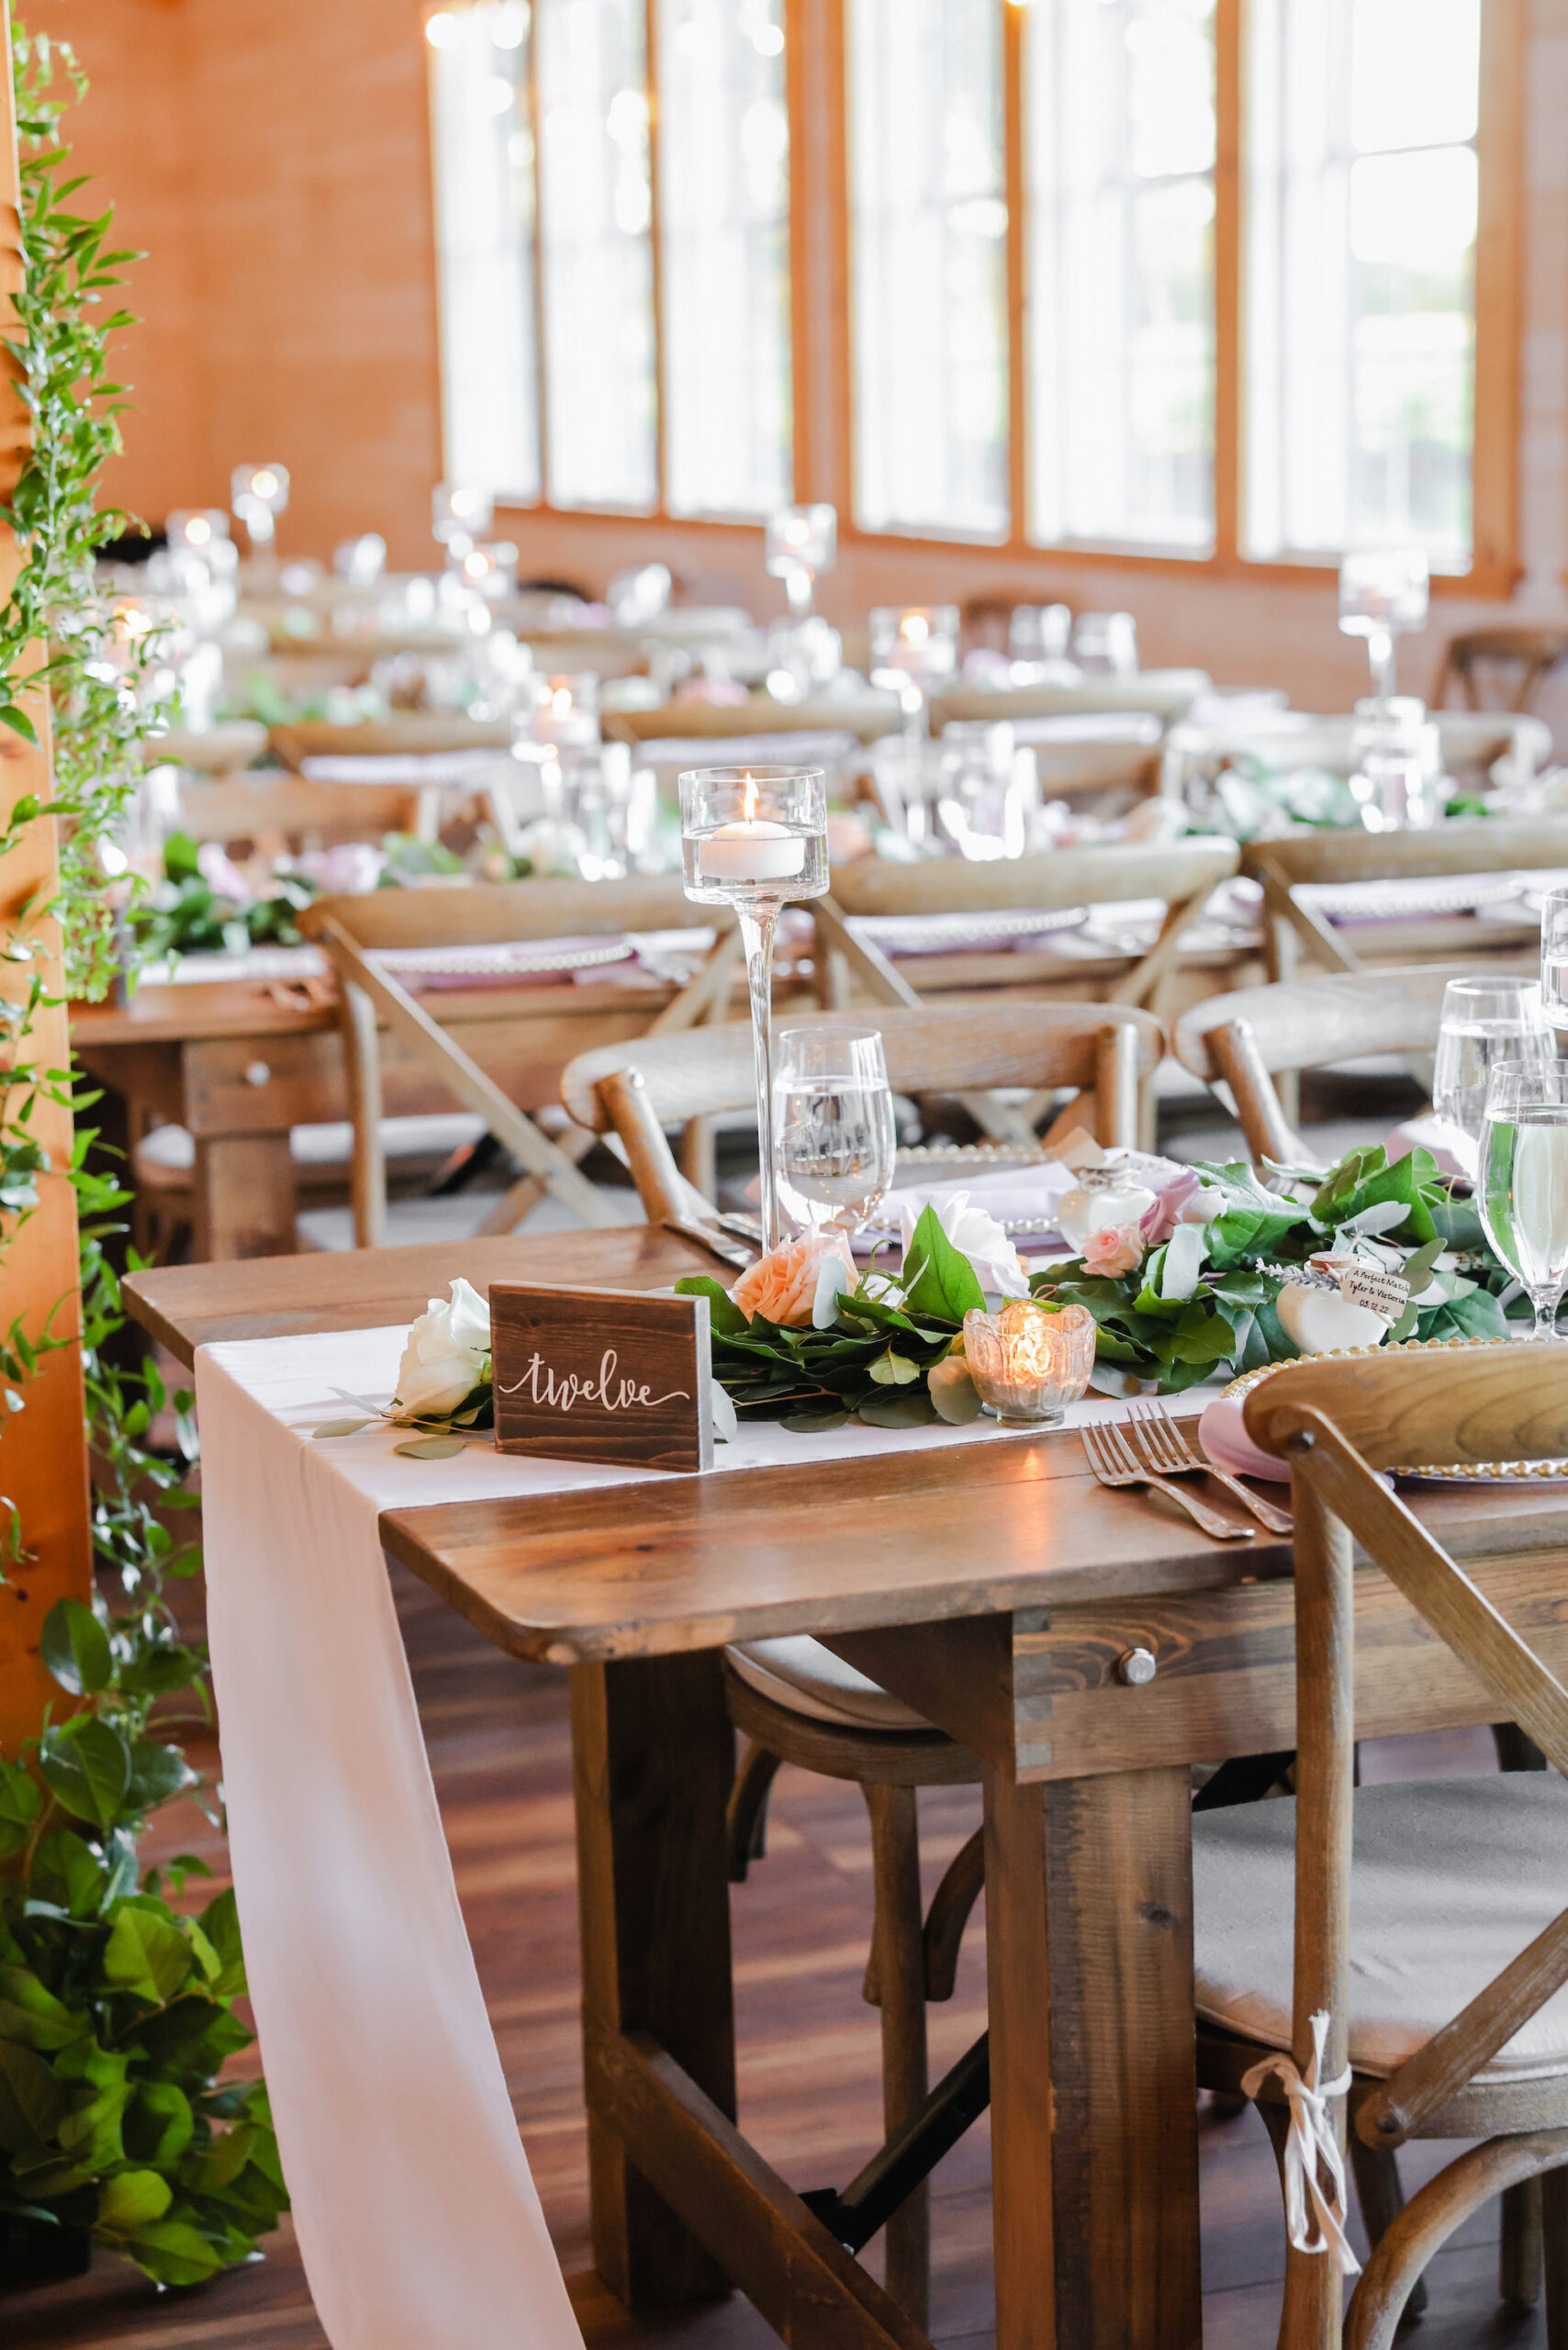 Wooden Table Number Sign Ideas with Farm Tables | Southern Vintage Wedding Reception Decor